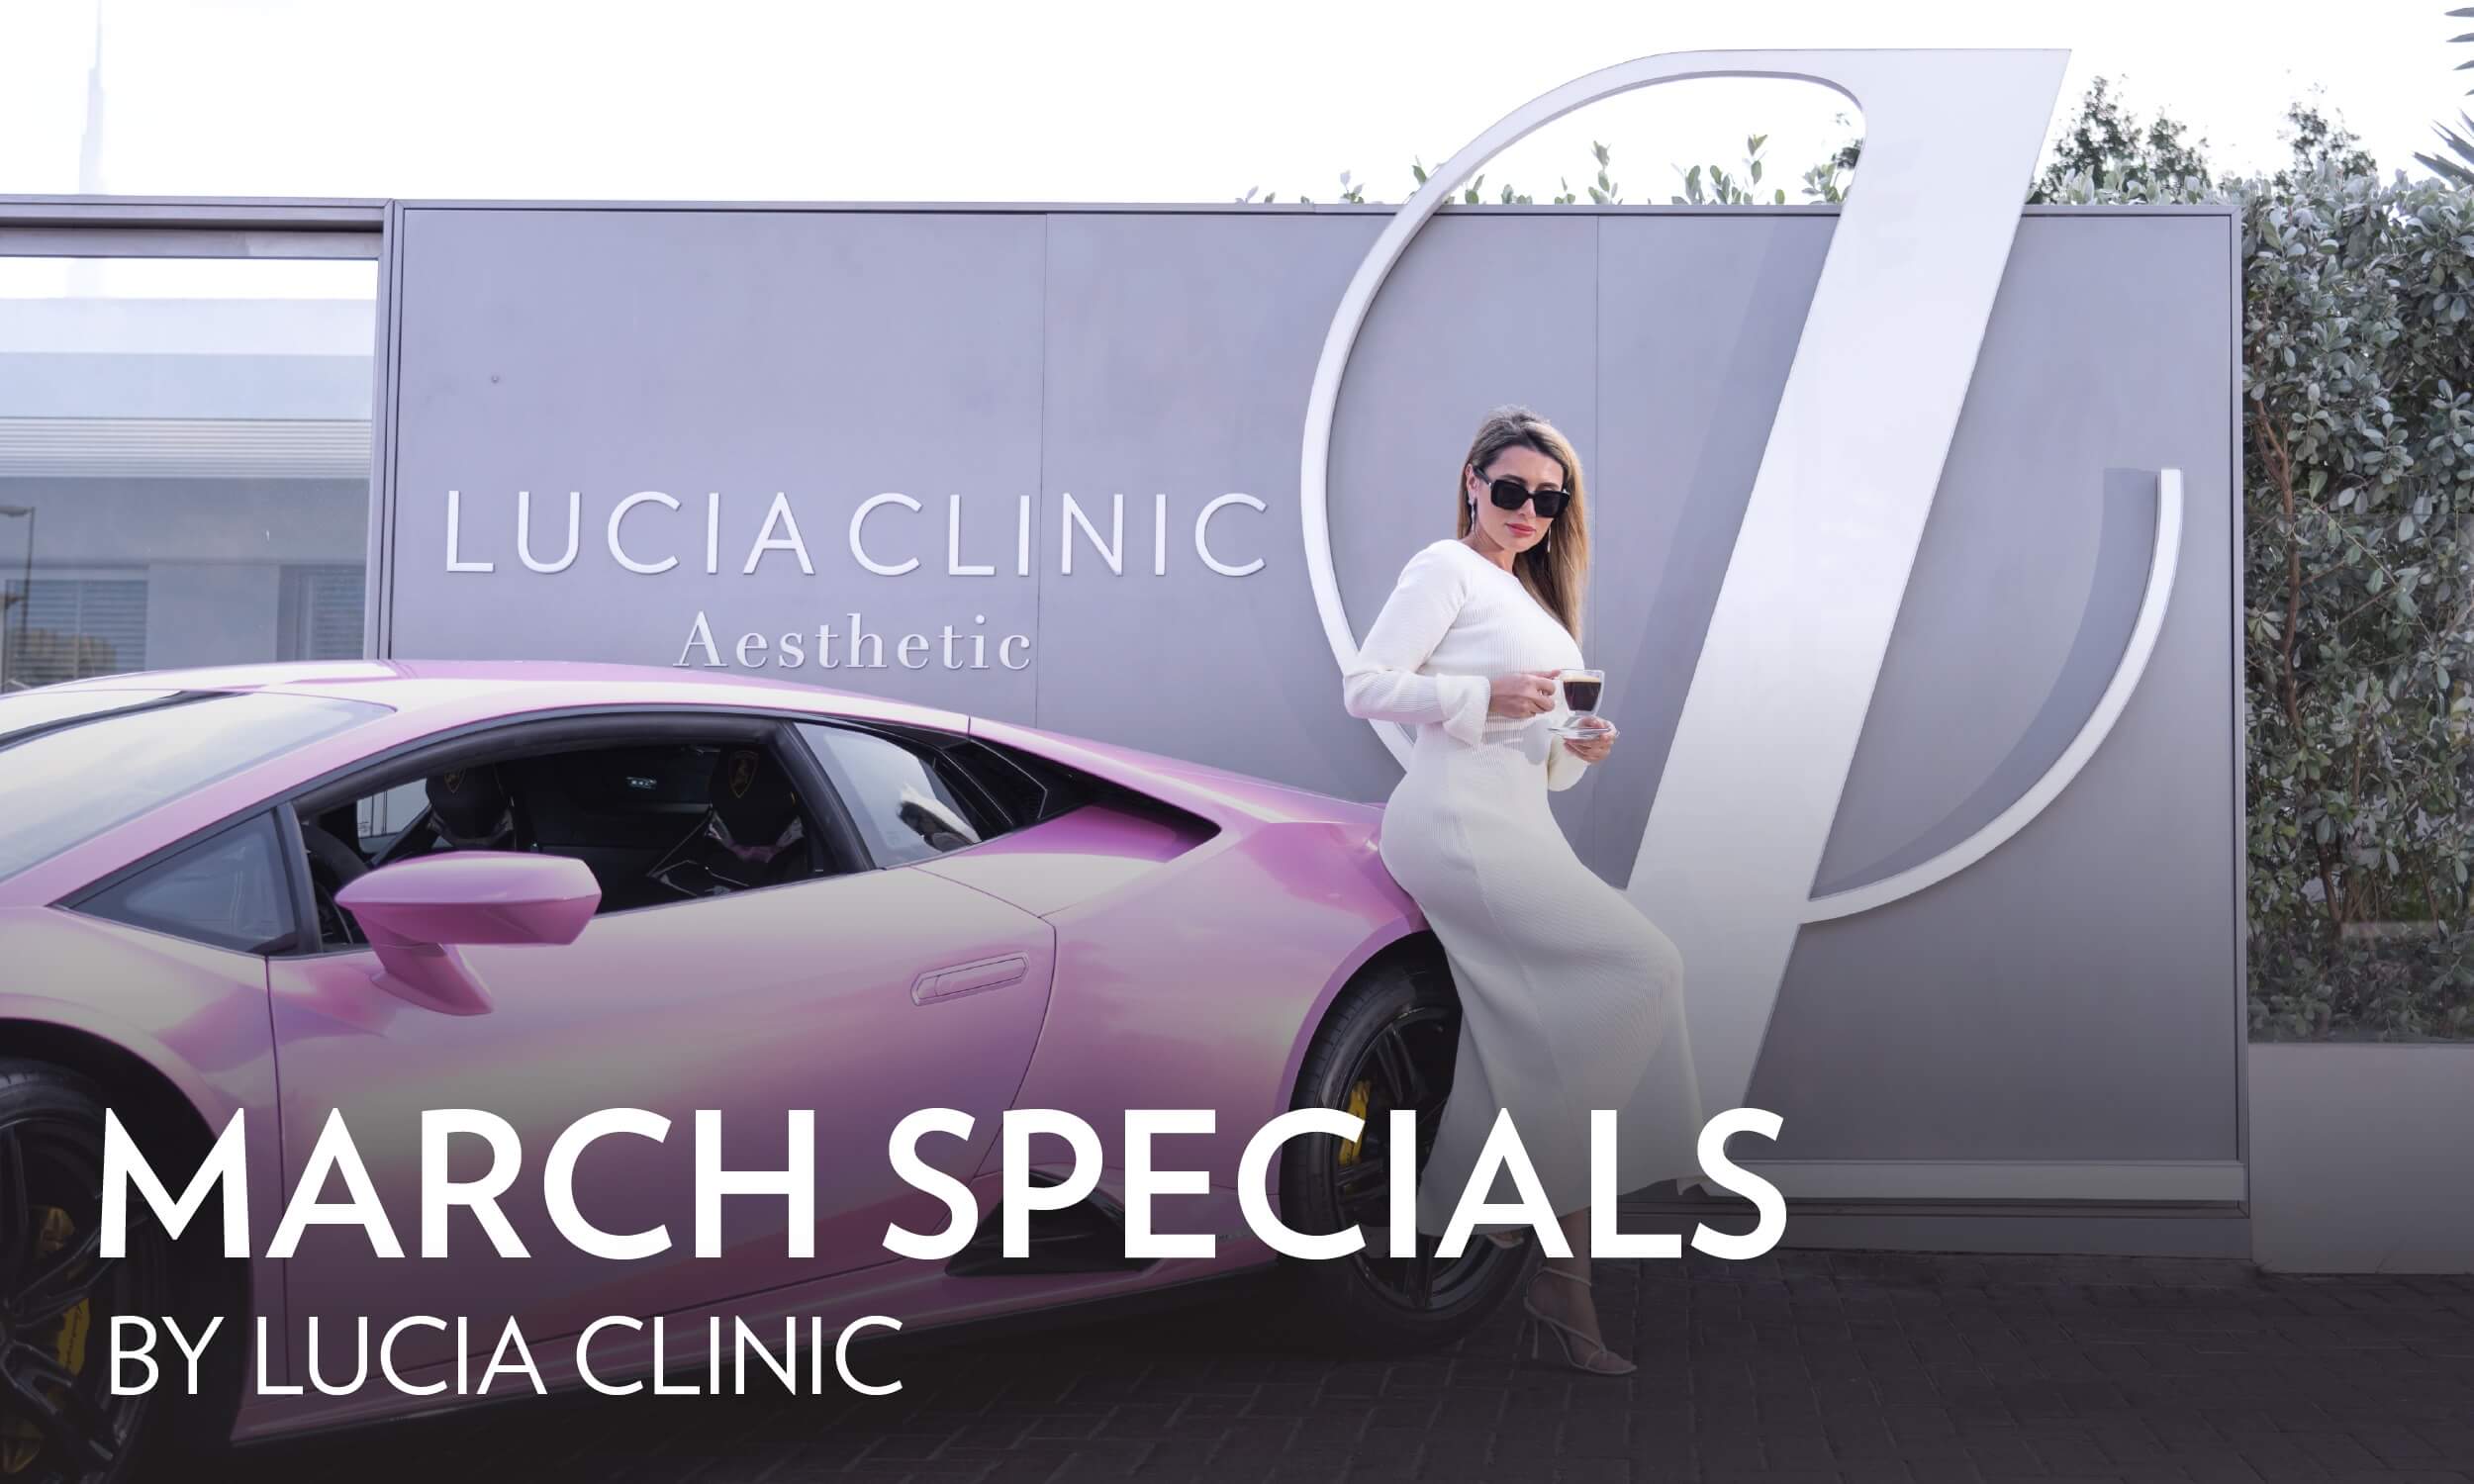 Make your skin flawless with Lucia Clinic’s March specials - EmFace plus Accent Prime, CoolSculpting, Sofwave or free plastic surgery consultation just for you.